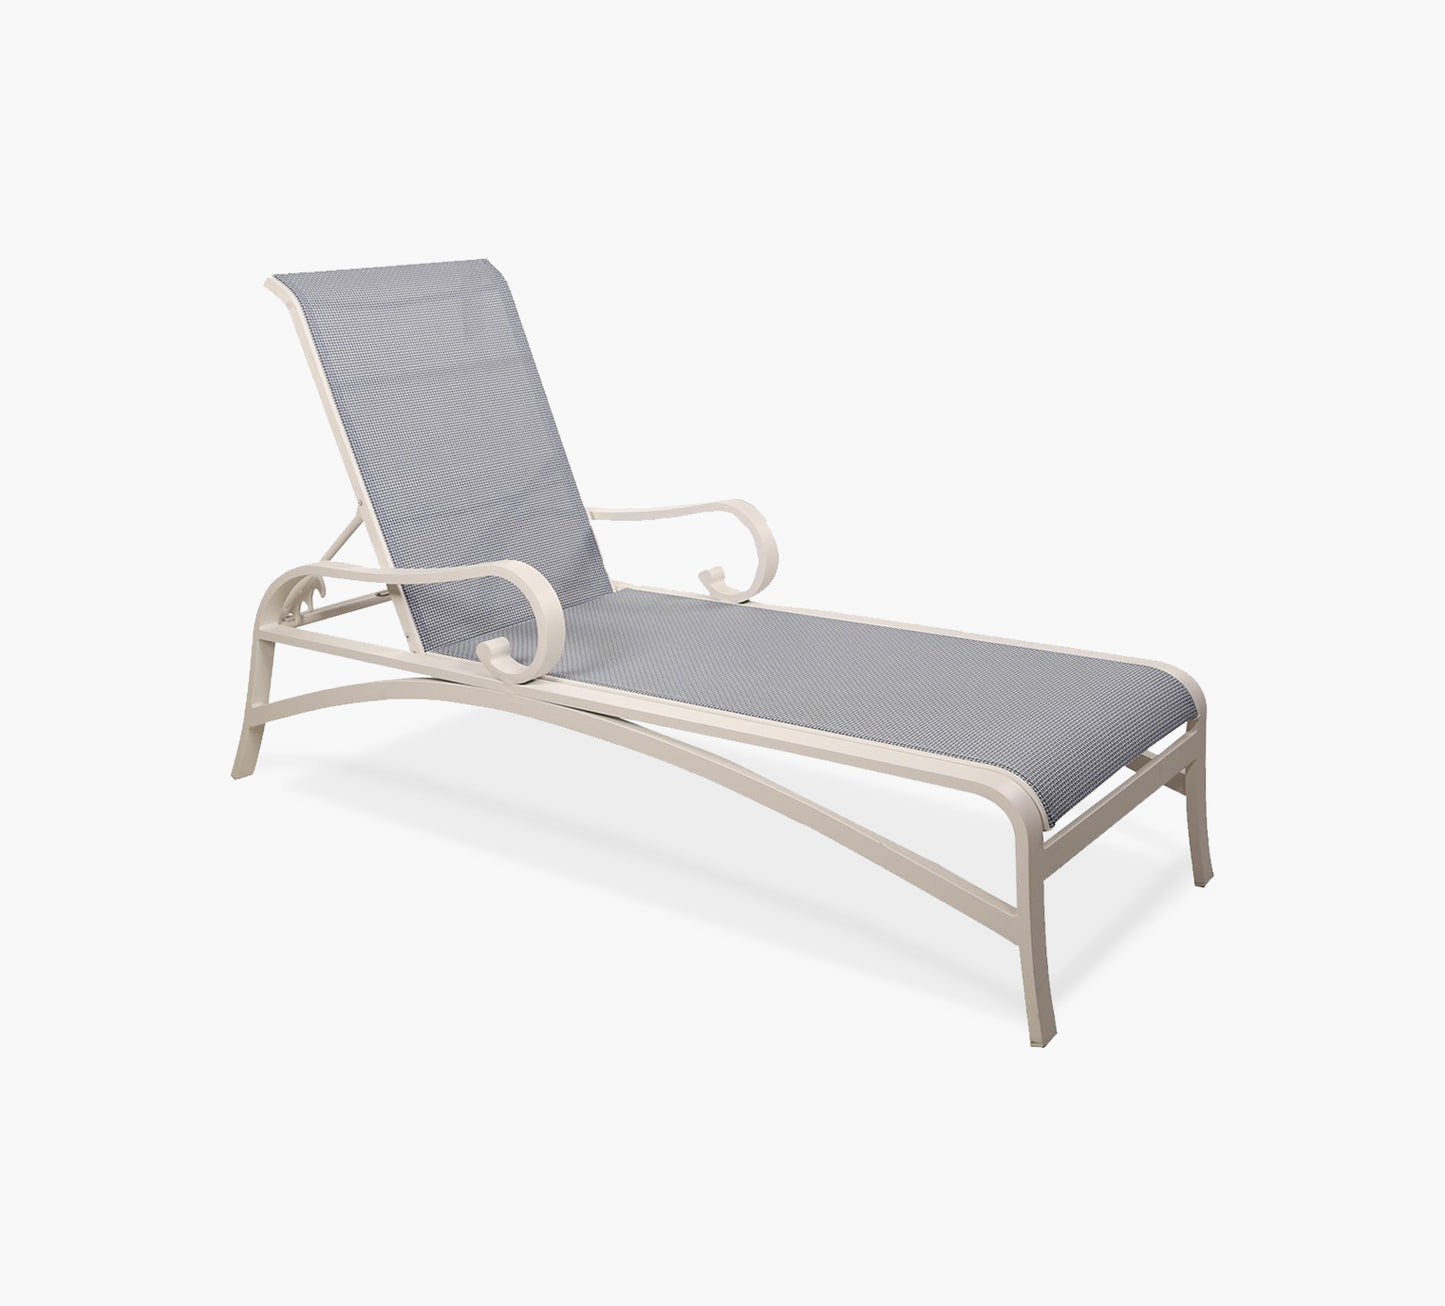 Mariner Outdoor Sling Chaise